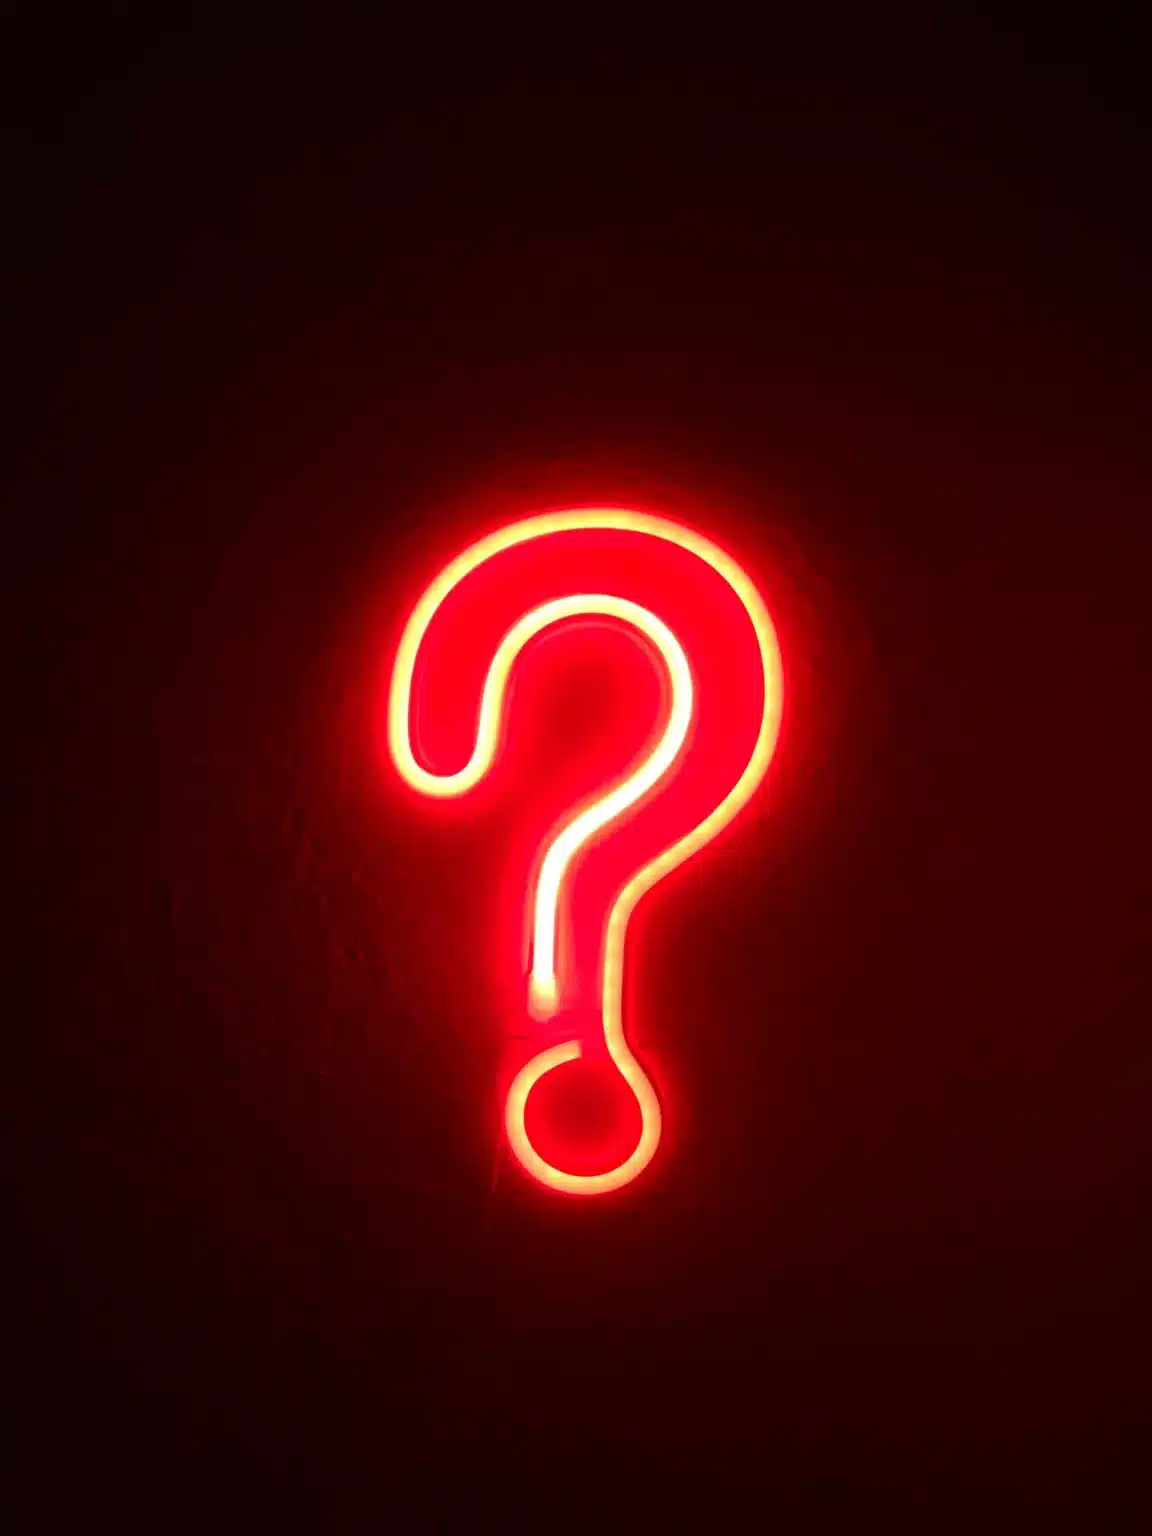 Picture of a red question mark on a black background